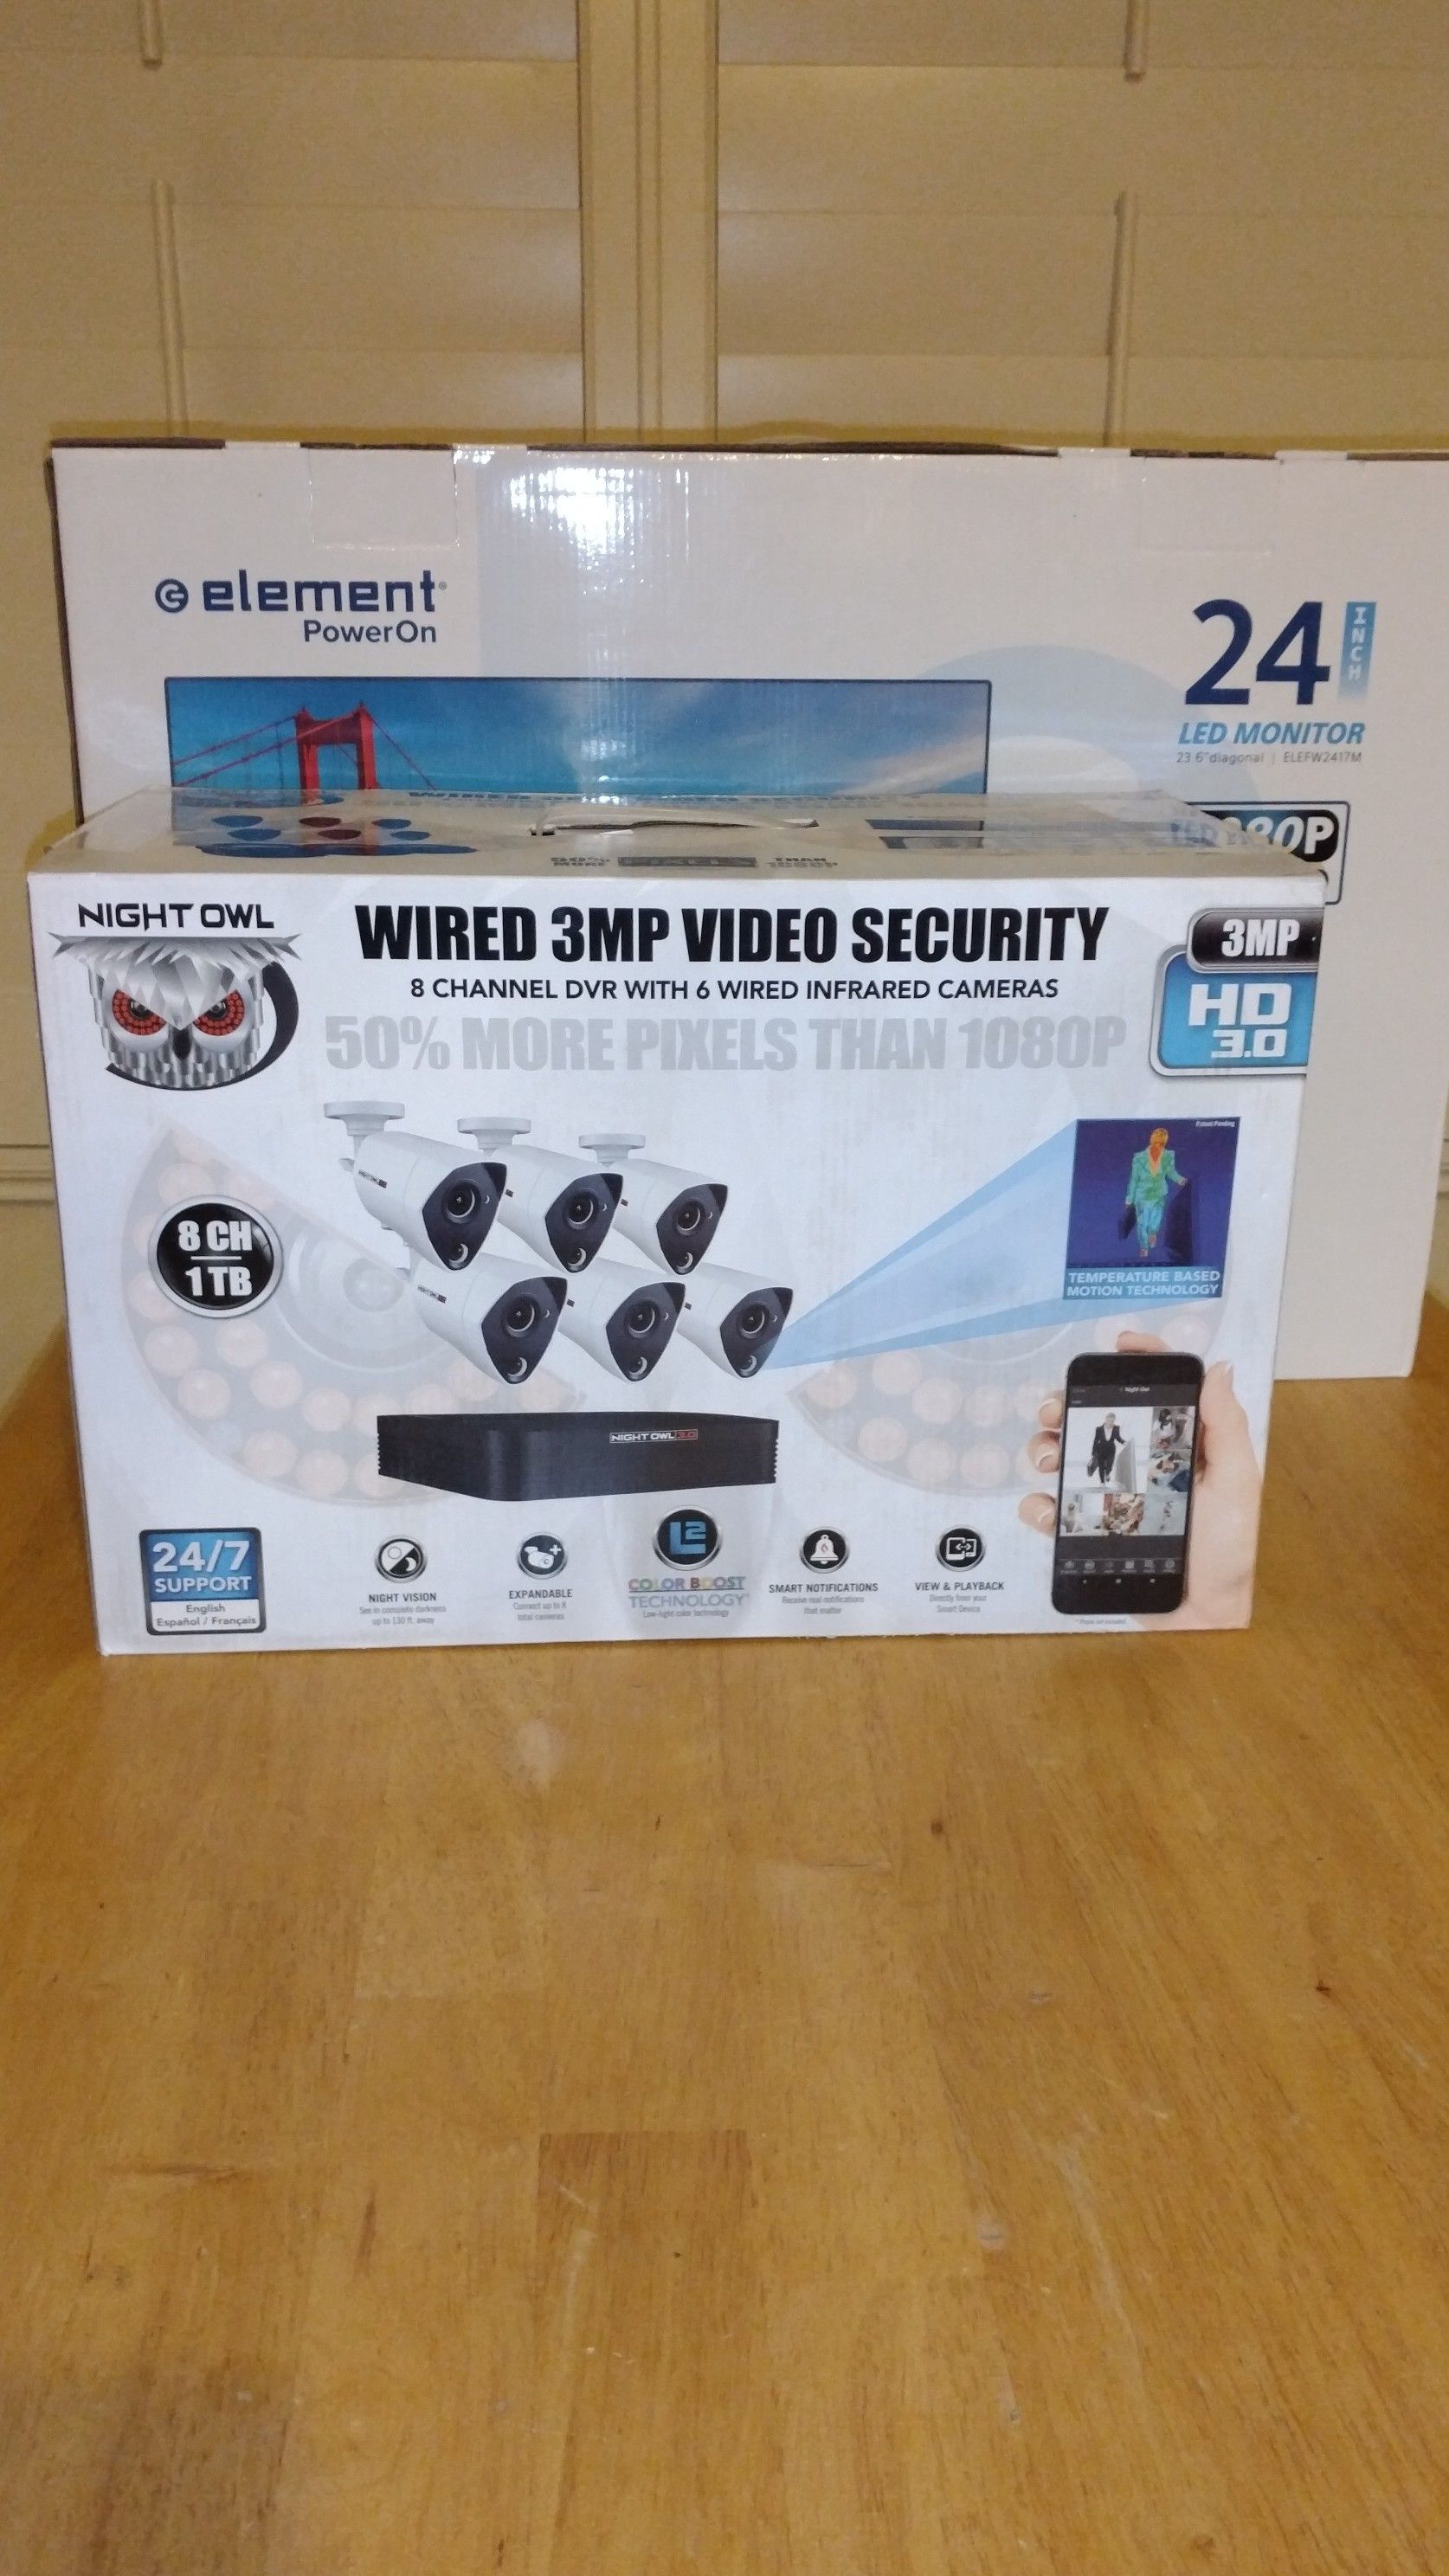 Night Owl 6 Camera 3MP 1TB Wired Video Security System w/ 24" Monitor